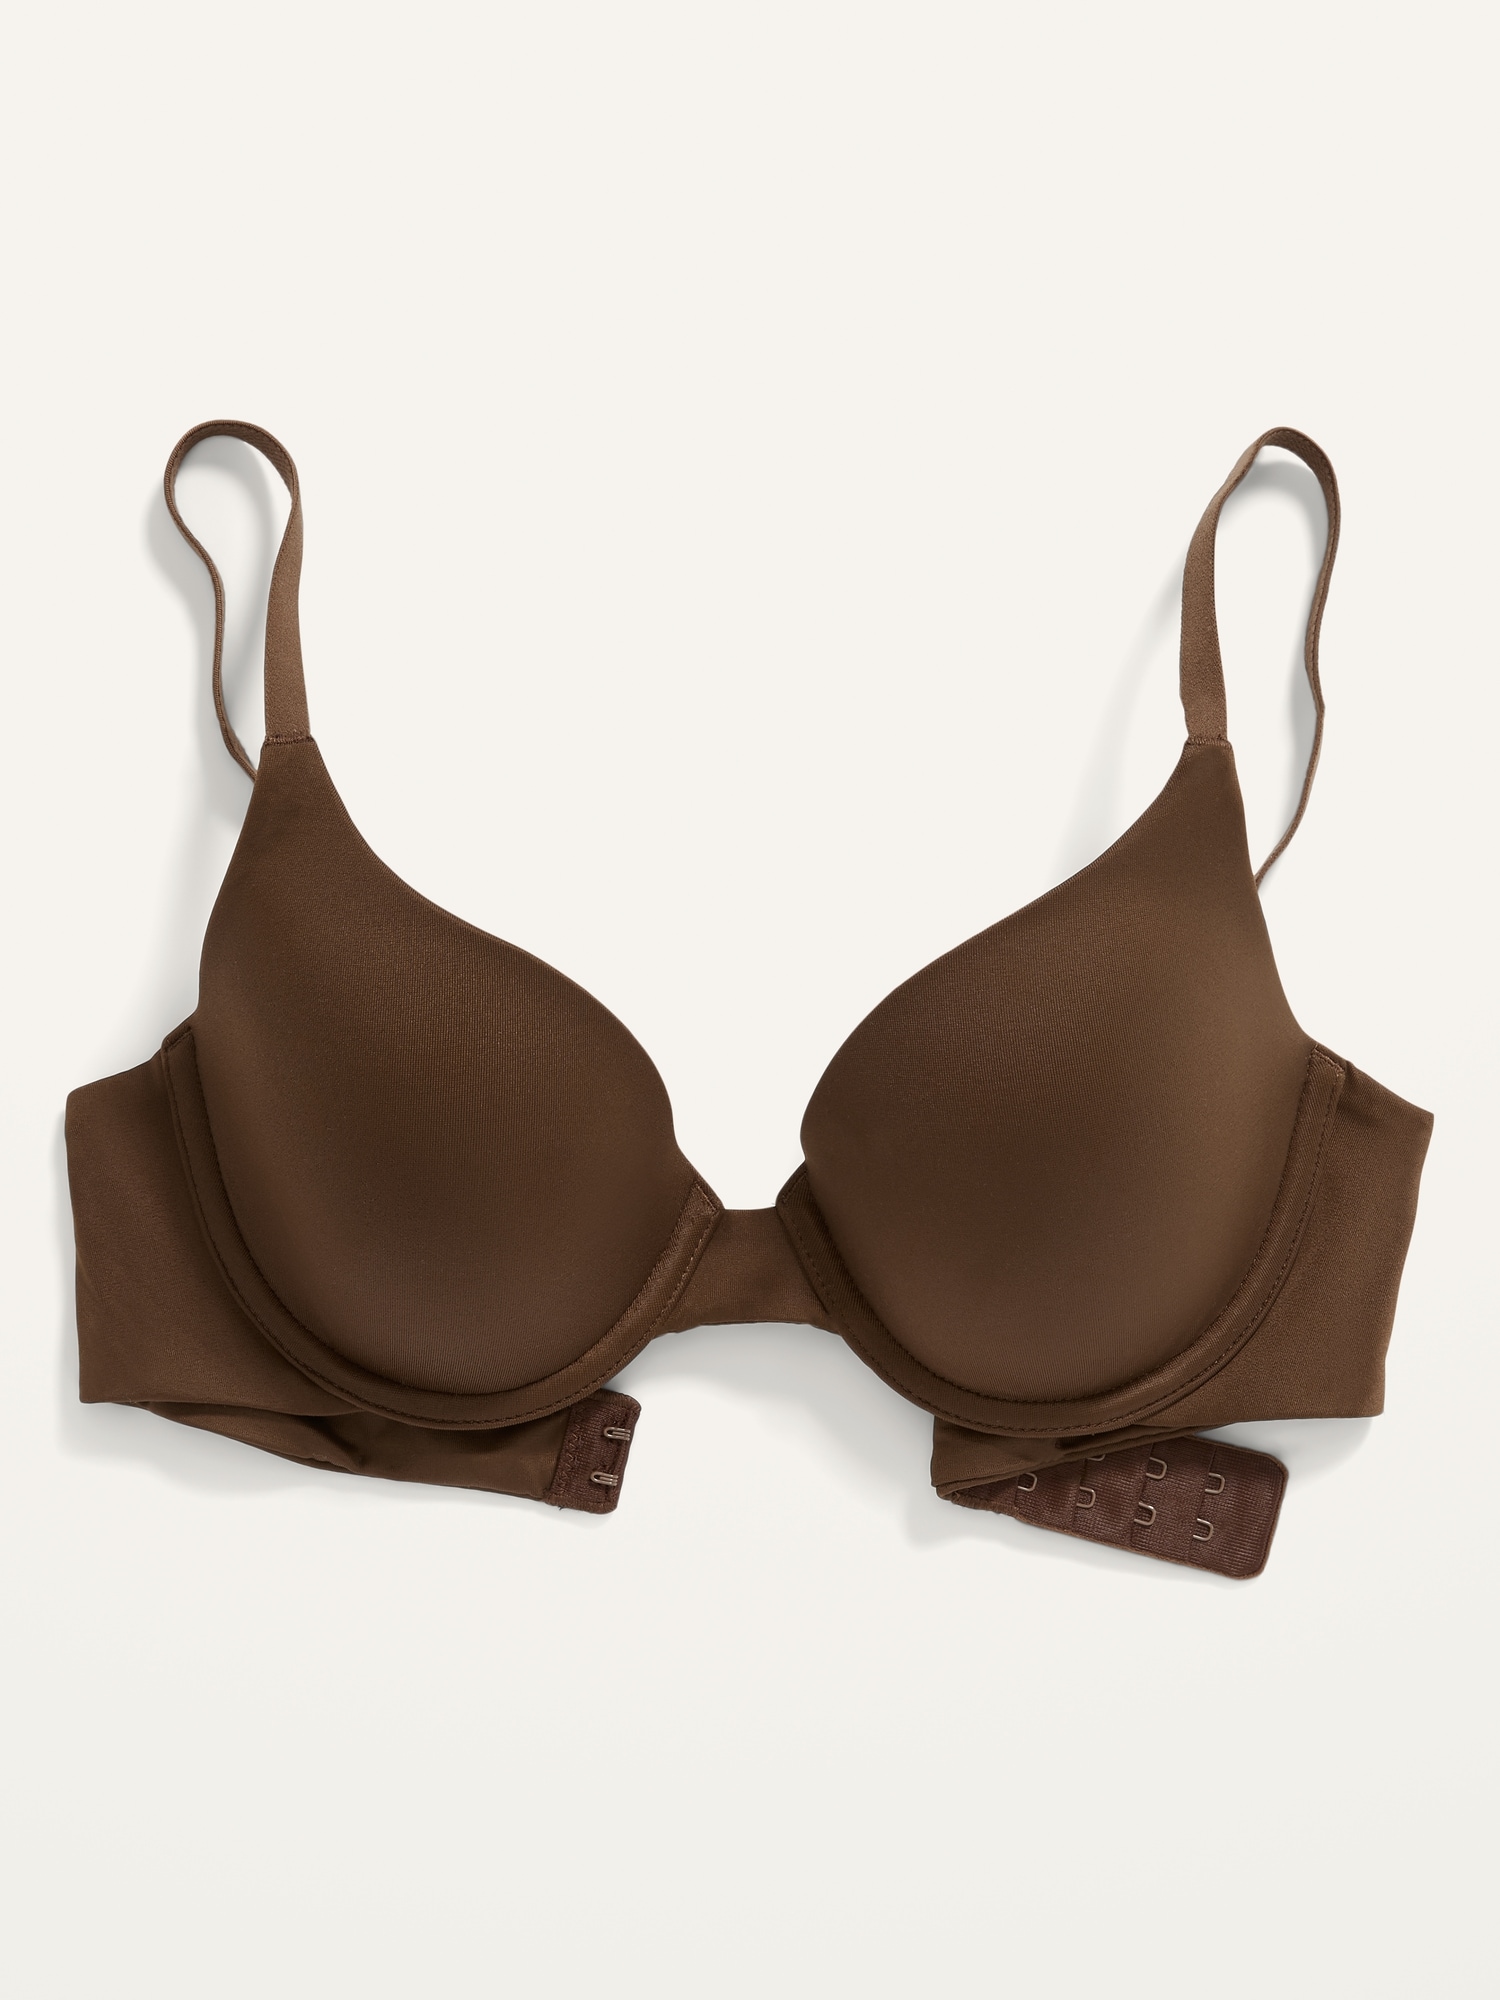 Cacique Invisible Backsmoother Lightly Lined Full Coverage Bra NWT in Size  46G - $28 New With Tags - From Kristi